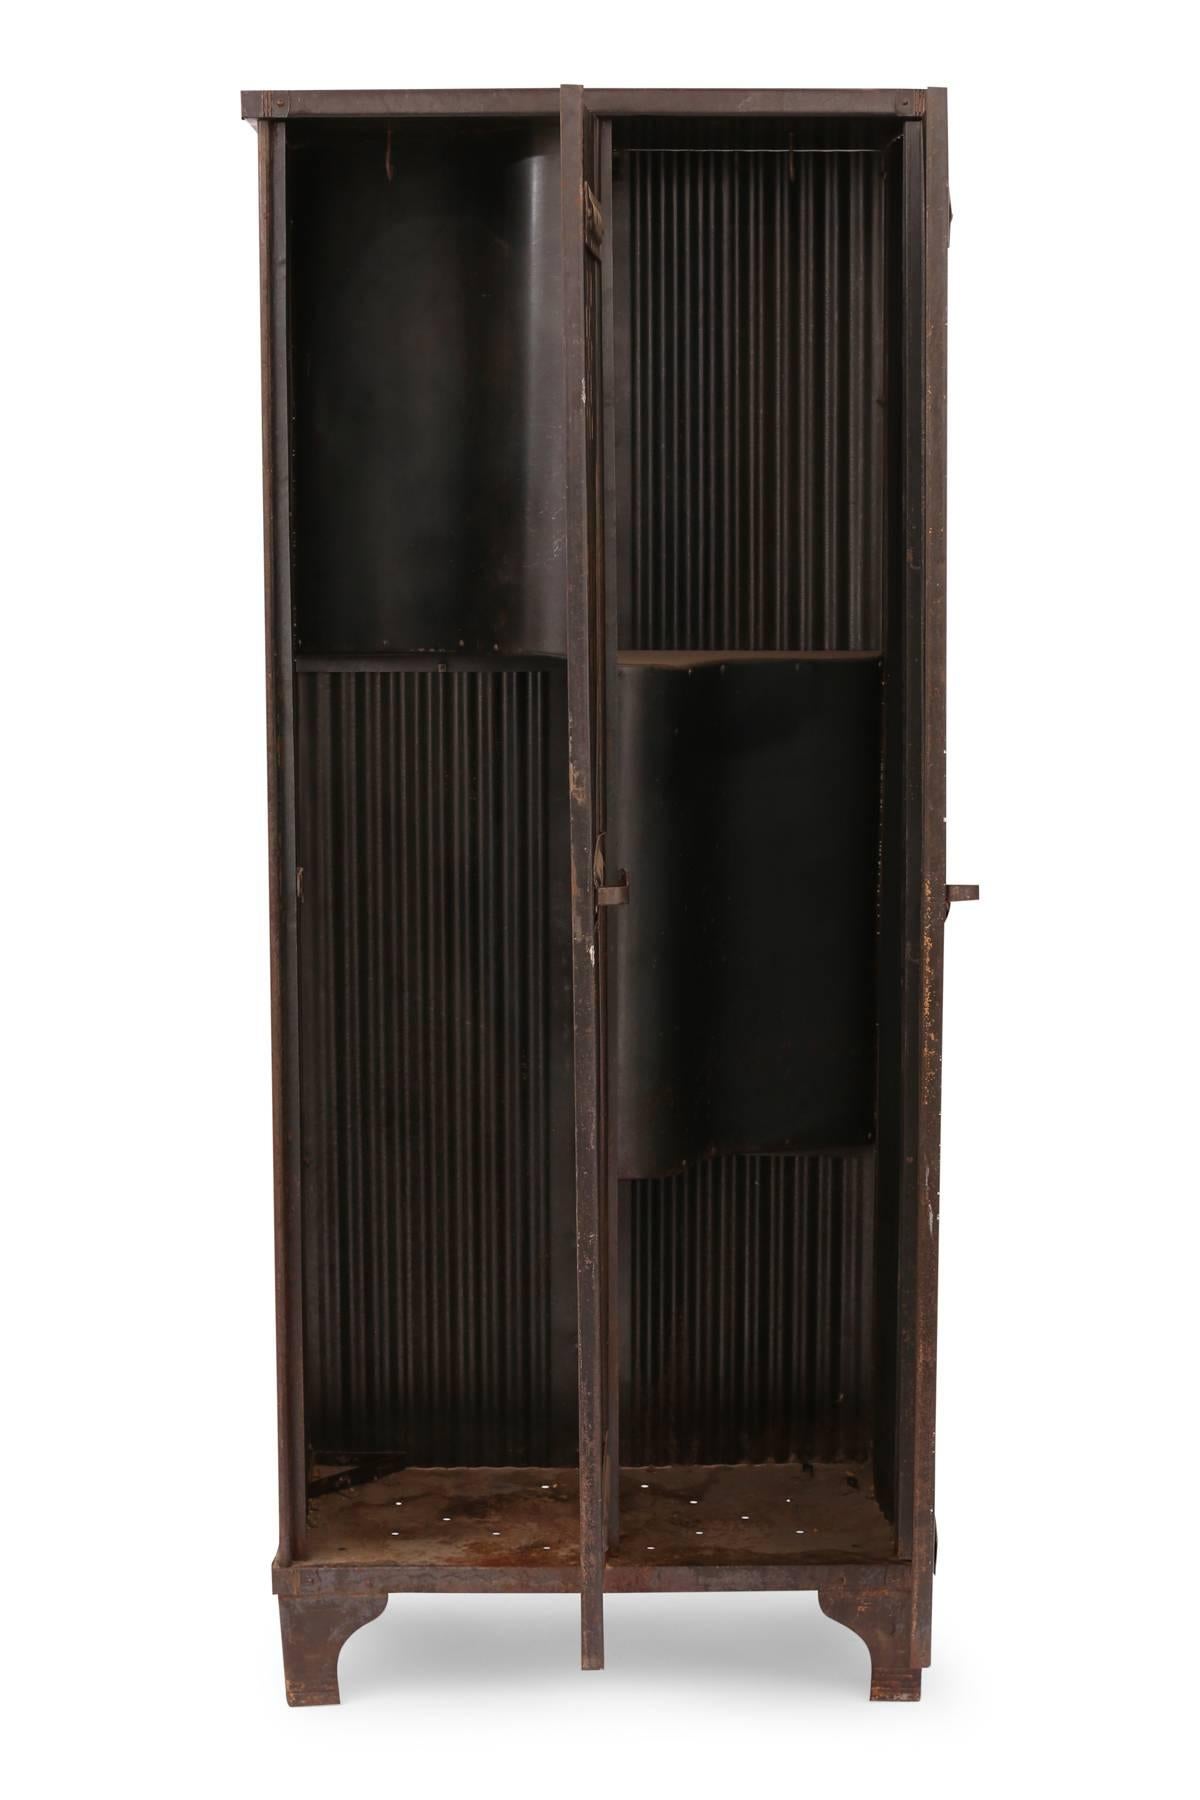 1940s industrial metal locker or armoire from France. This all original example has a rich patina and seamlessly blends with streamline mid century or deco items. Great for indoors or out.